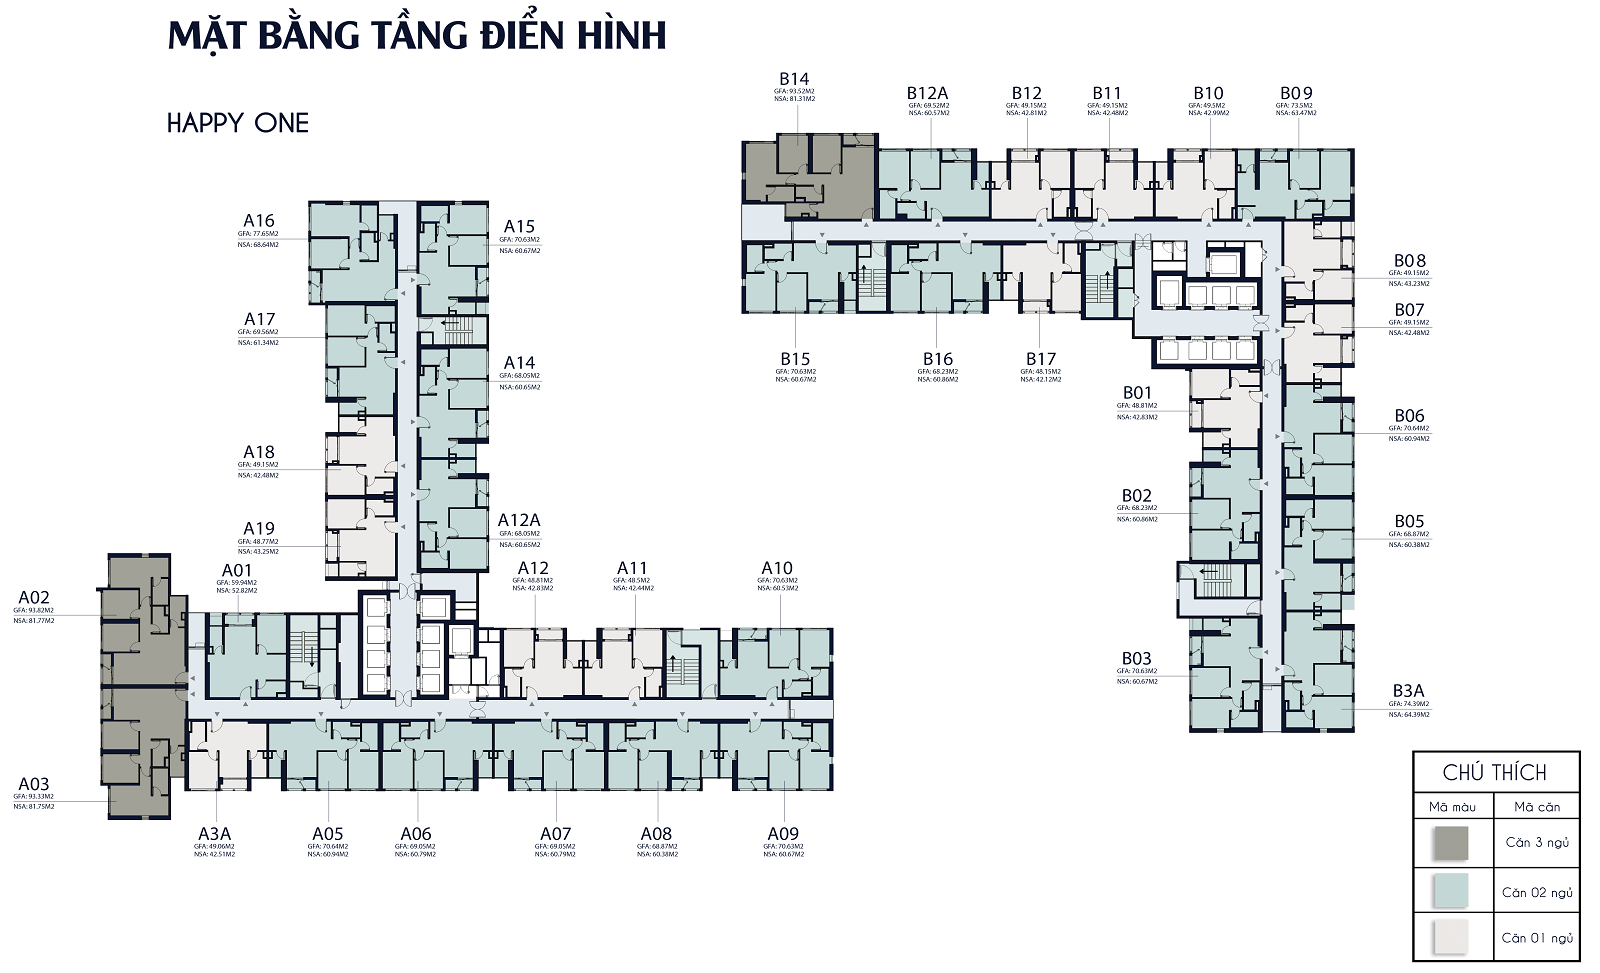 happy one central apartment floor plan